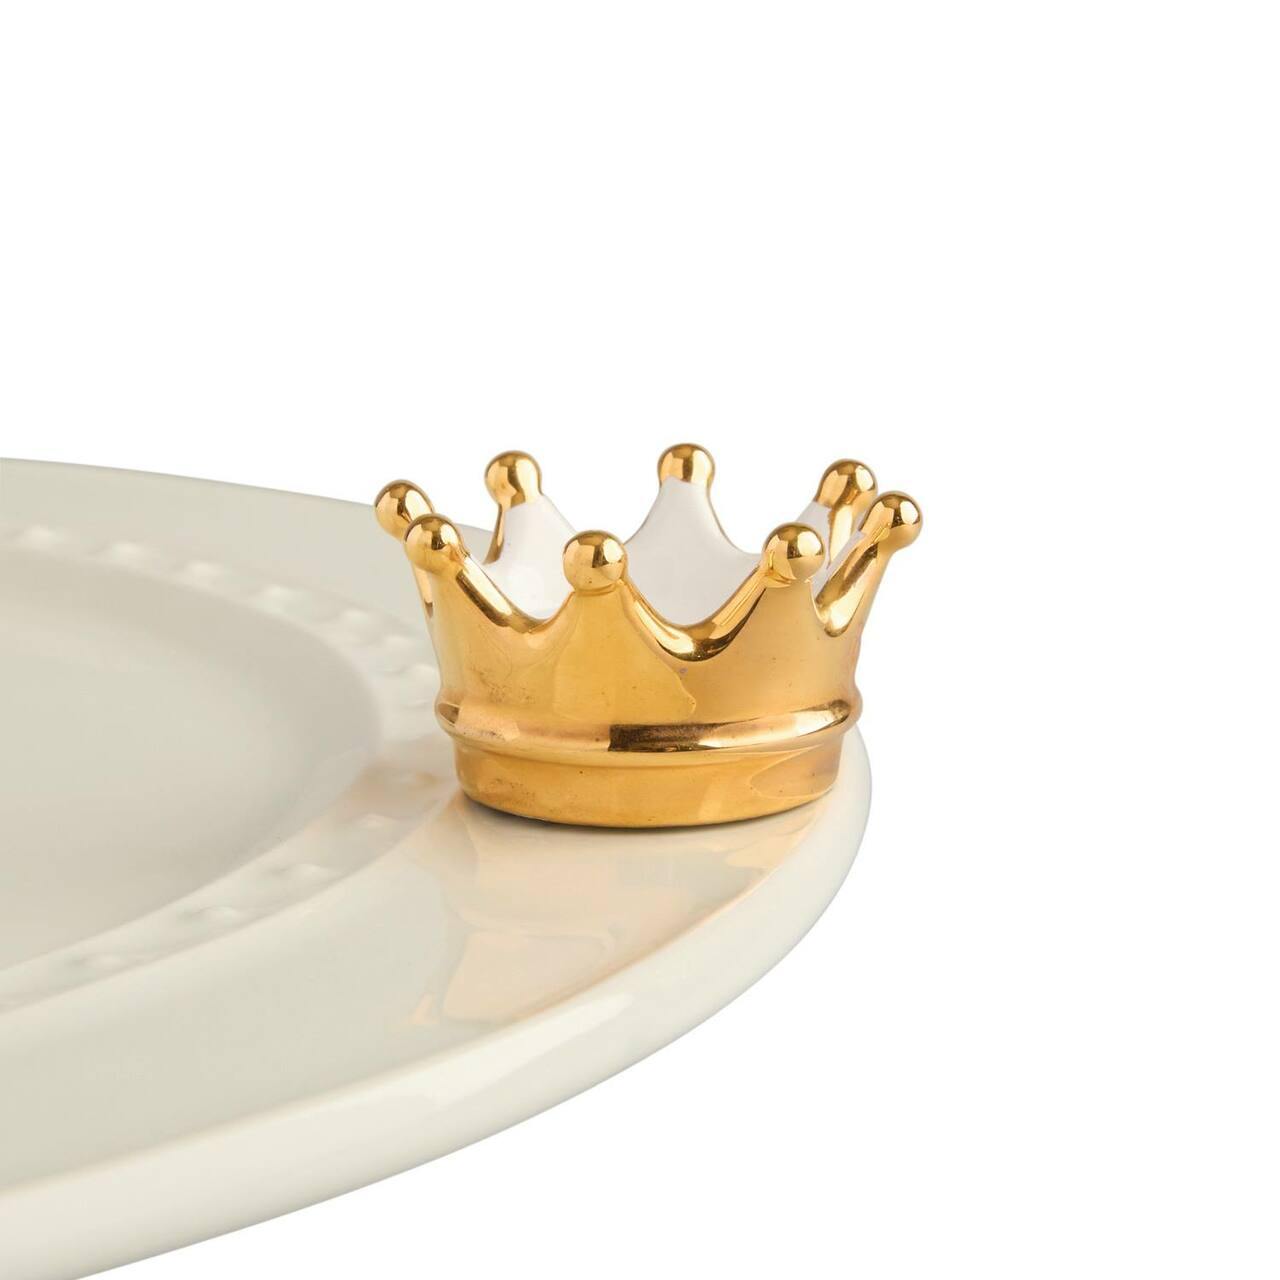 Metallic gold painted crown mini for Nora Fleming dishes